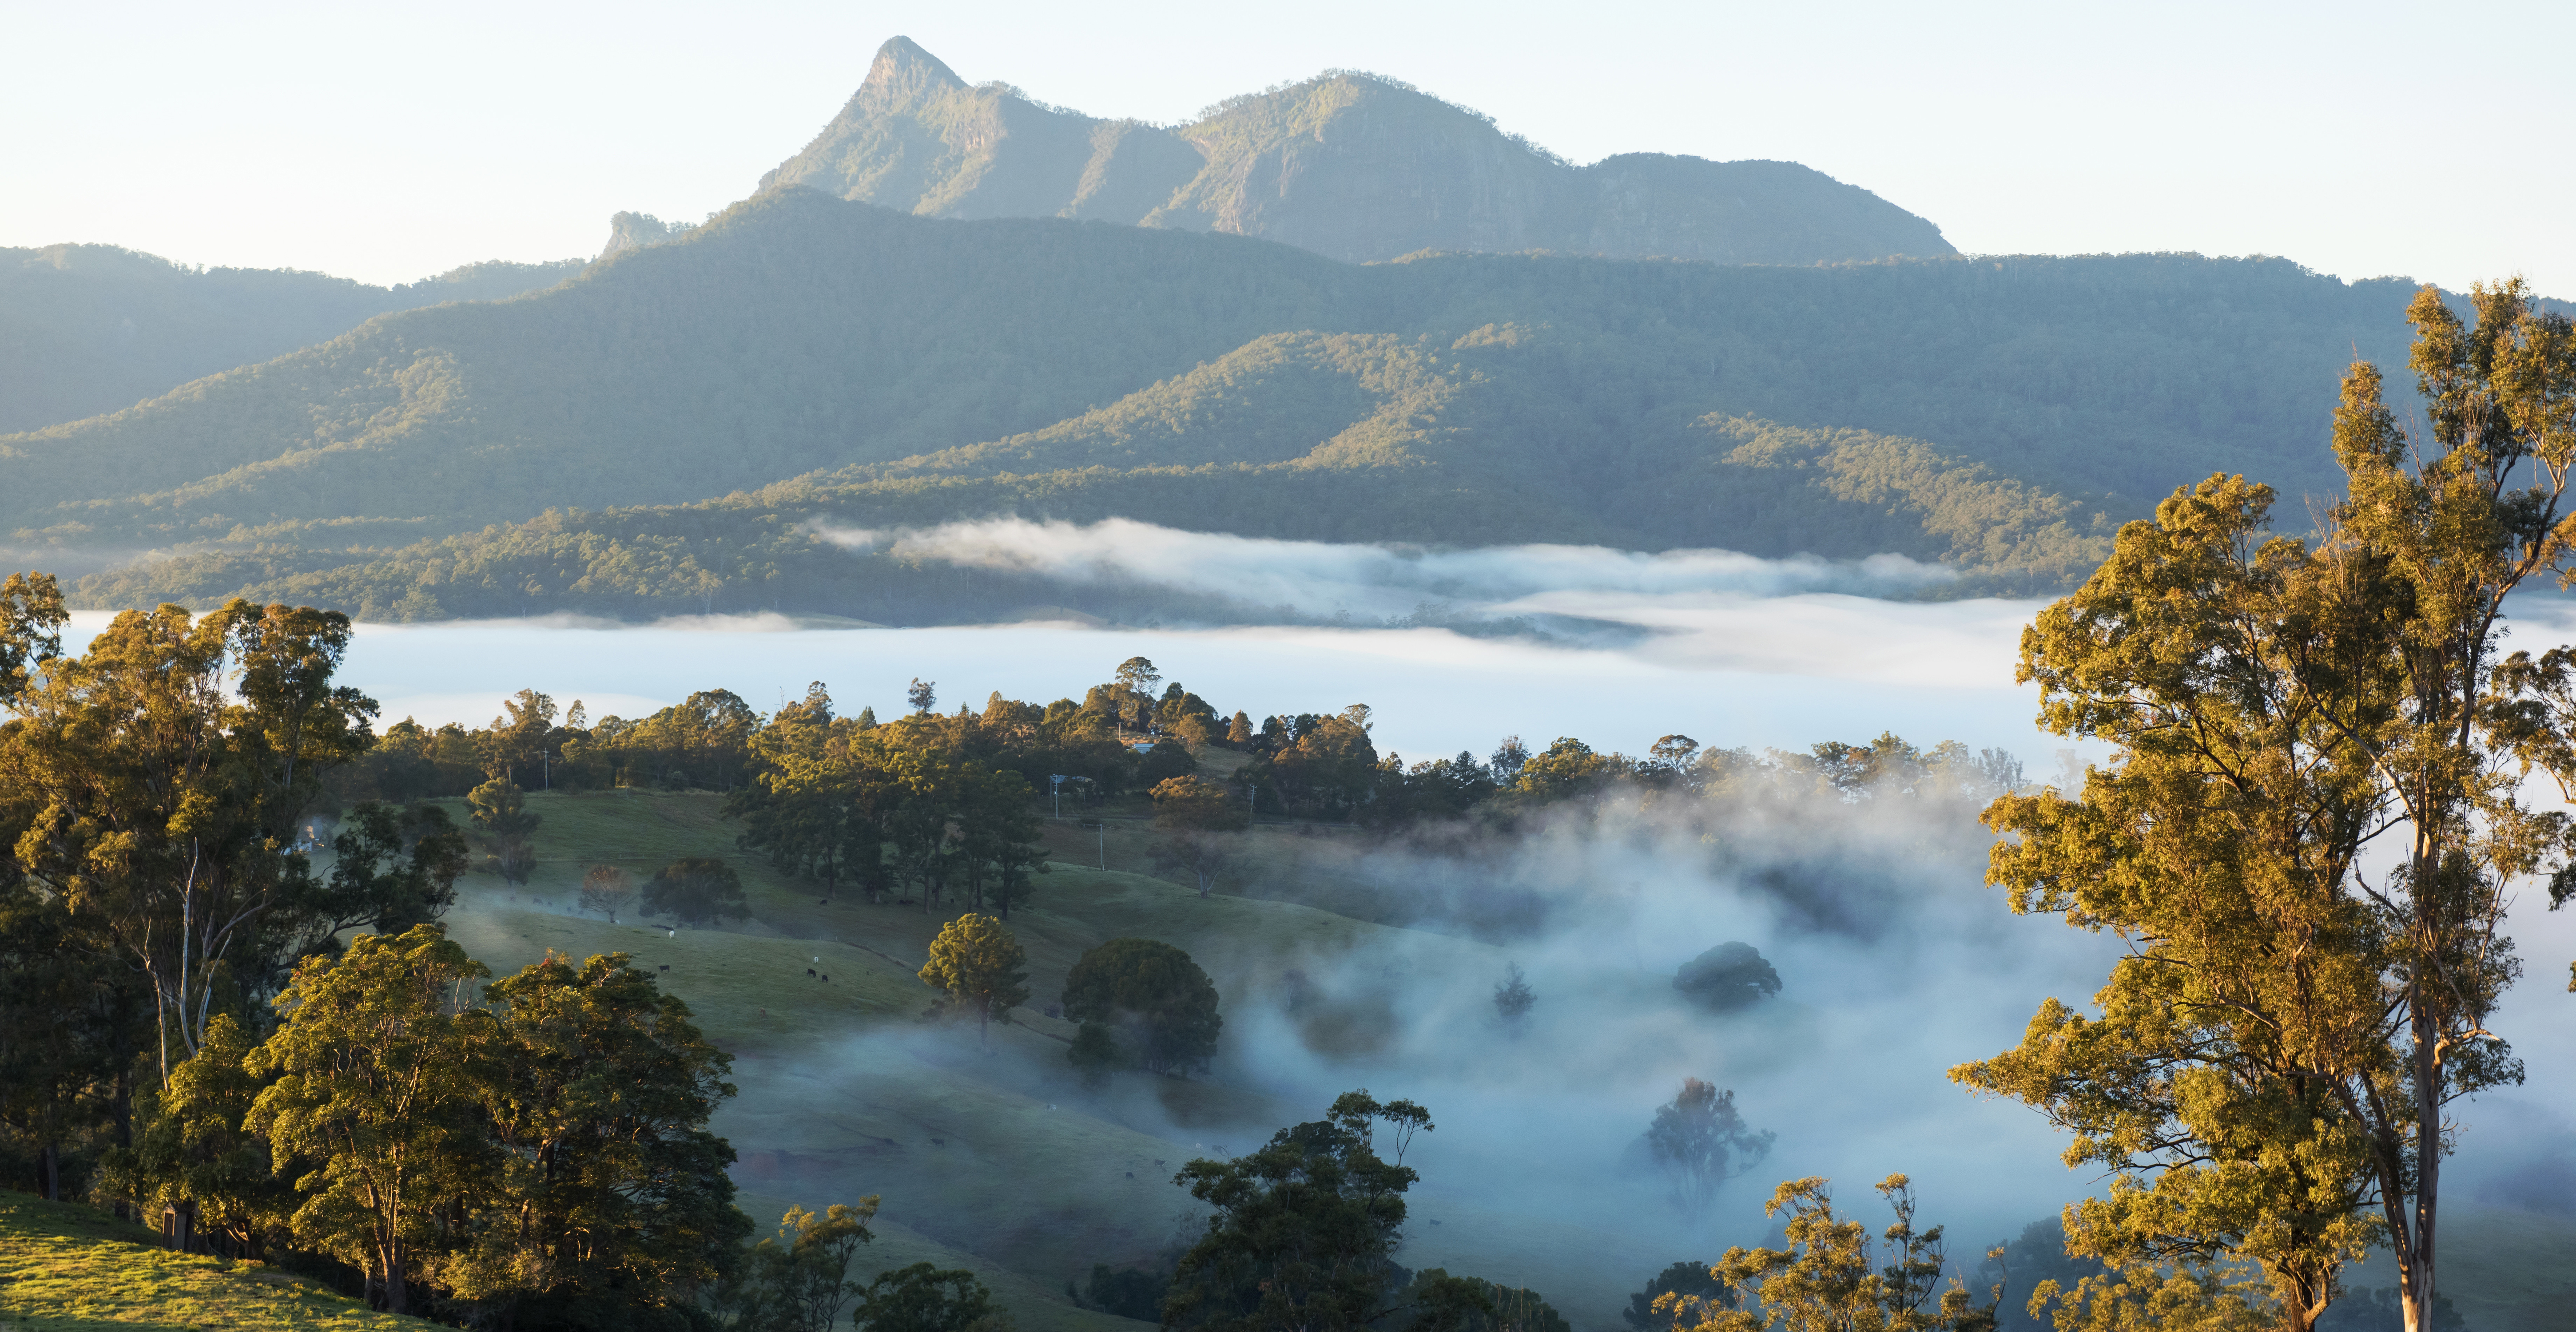  Landscape of trees with fog behind and mountains in the background in the Tweed Range in the North Coast of NSW